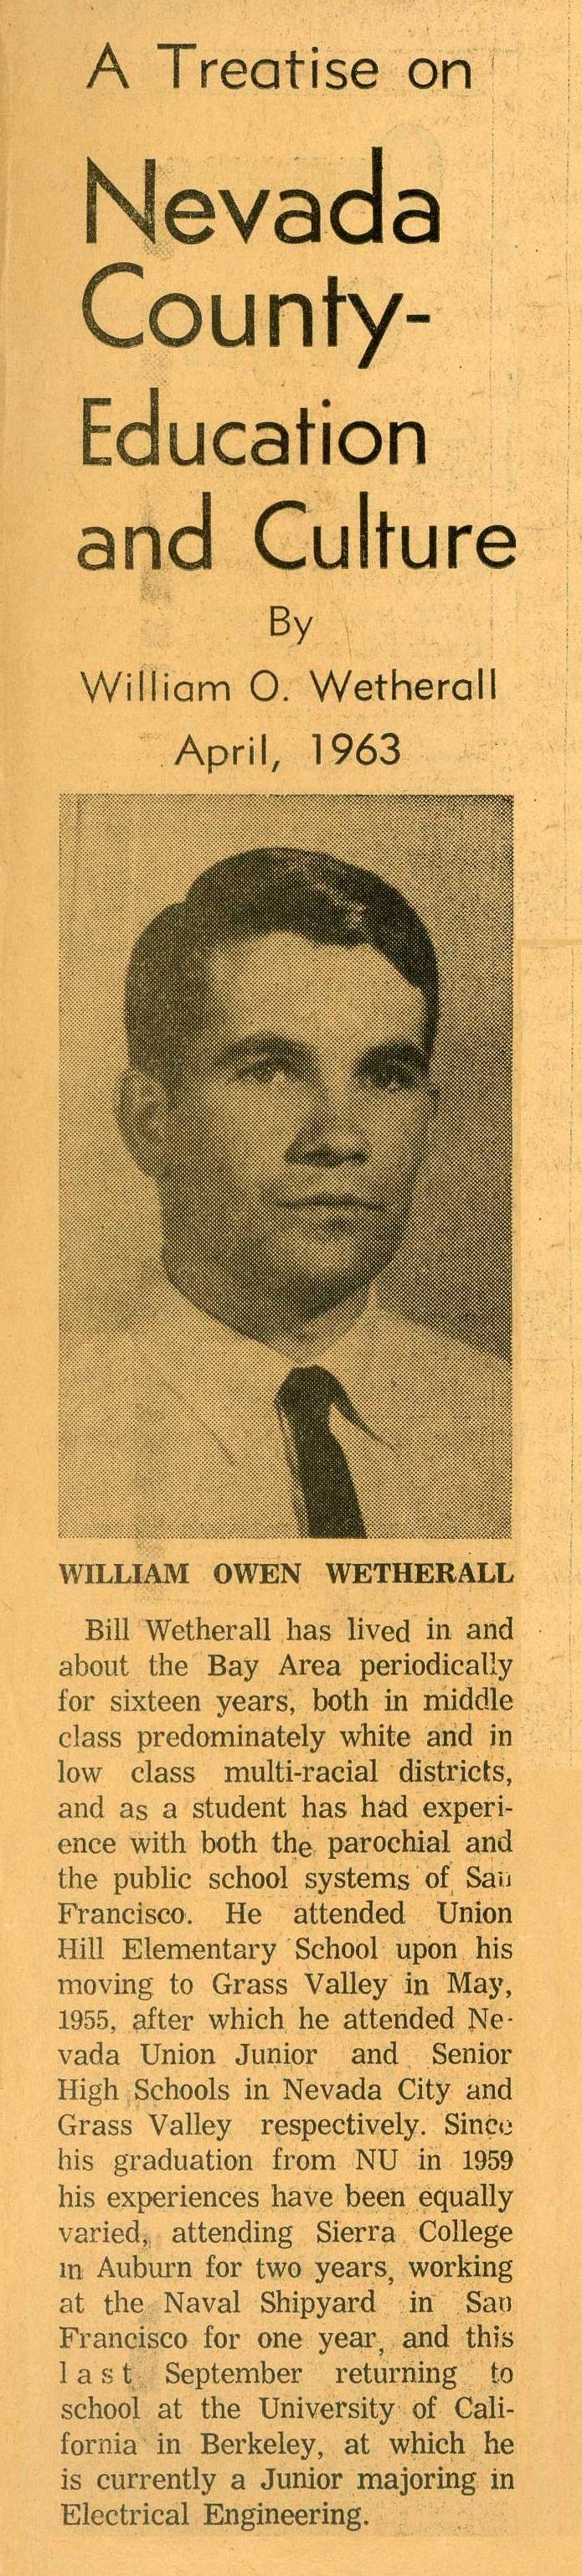 Wetherall 1963